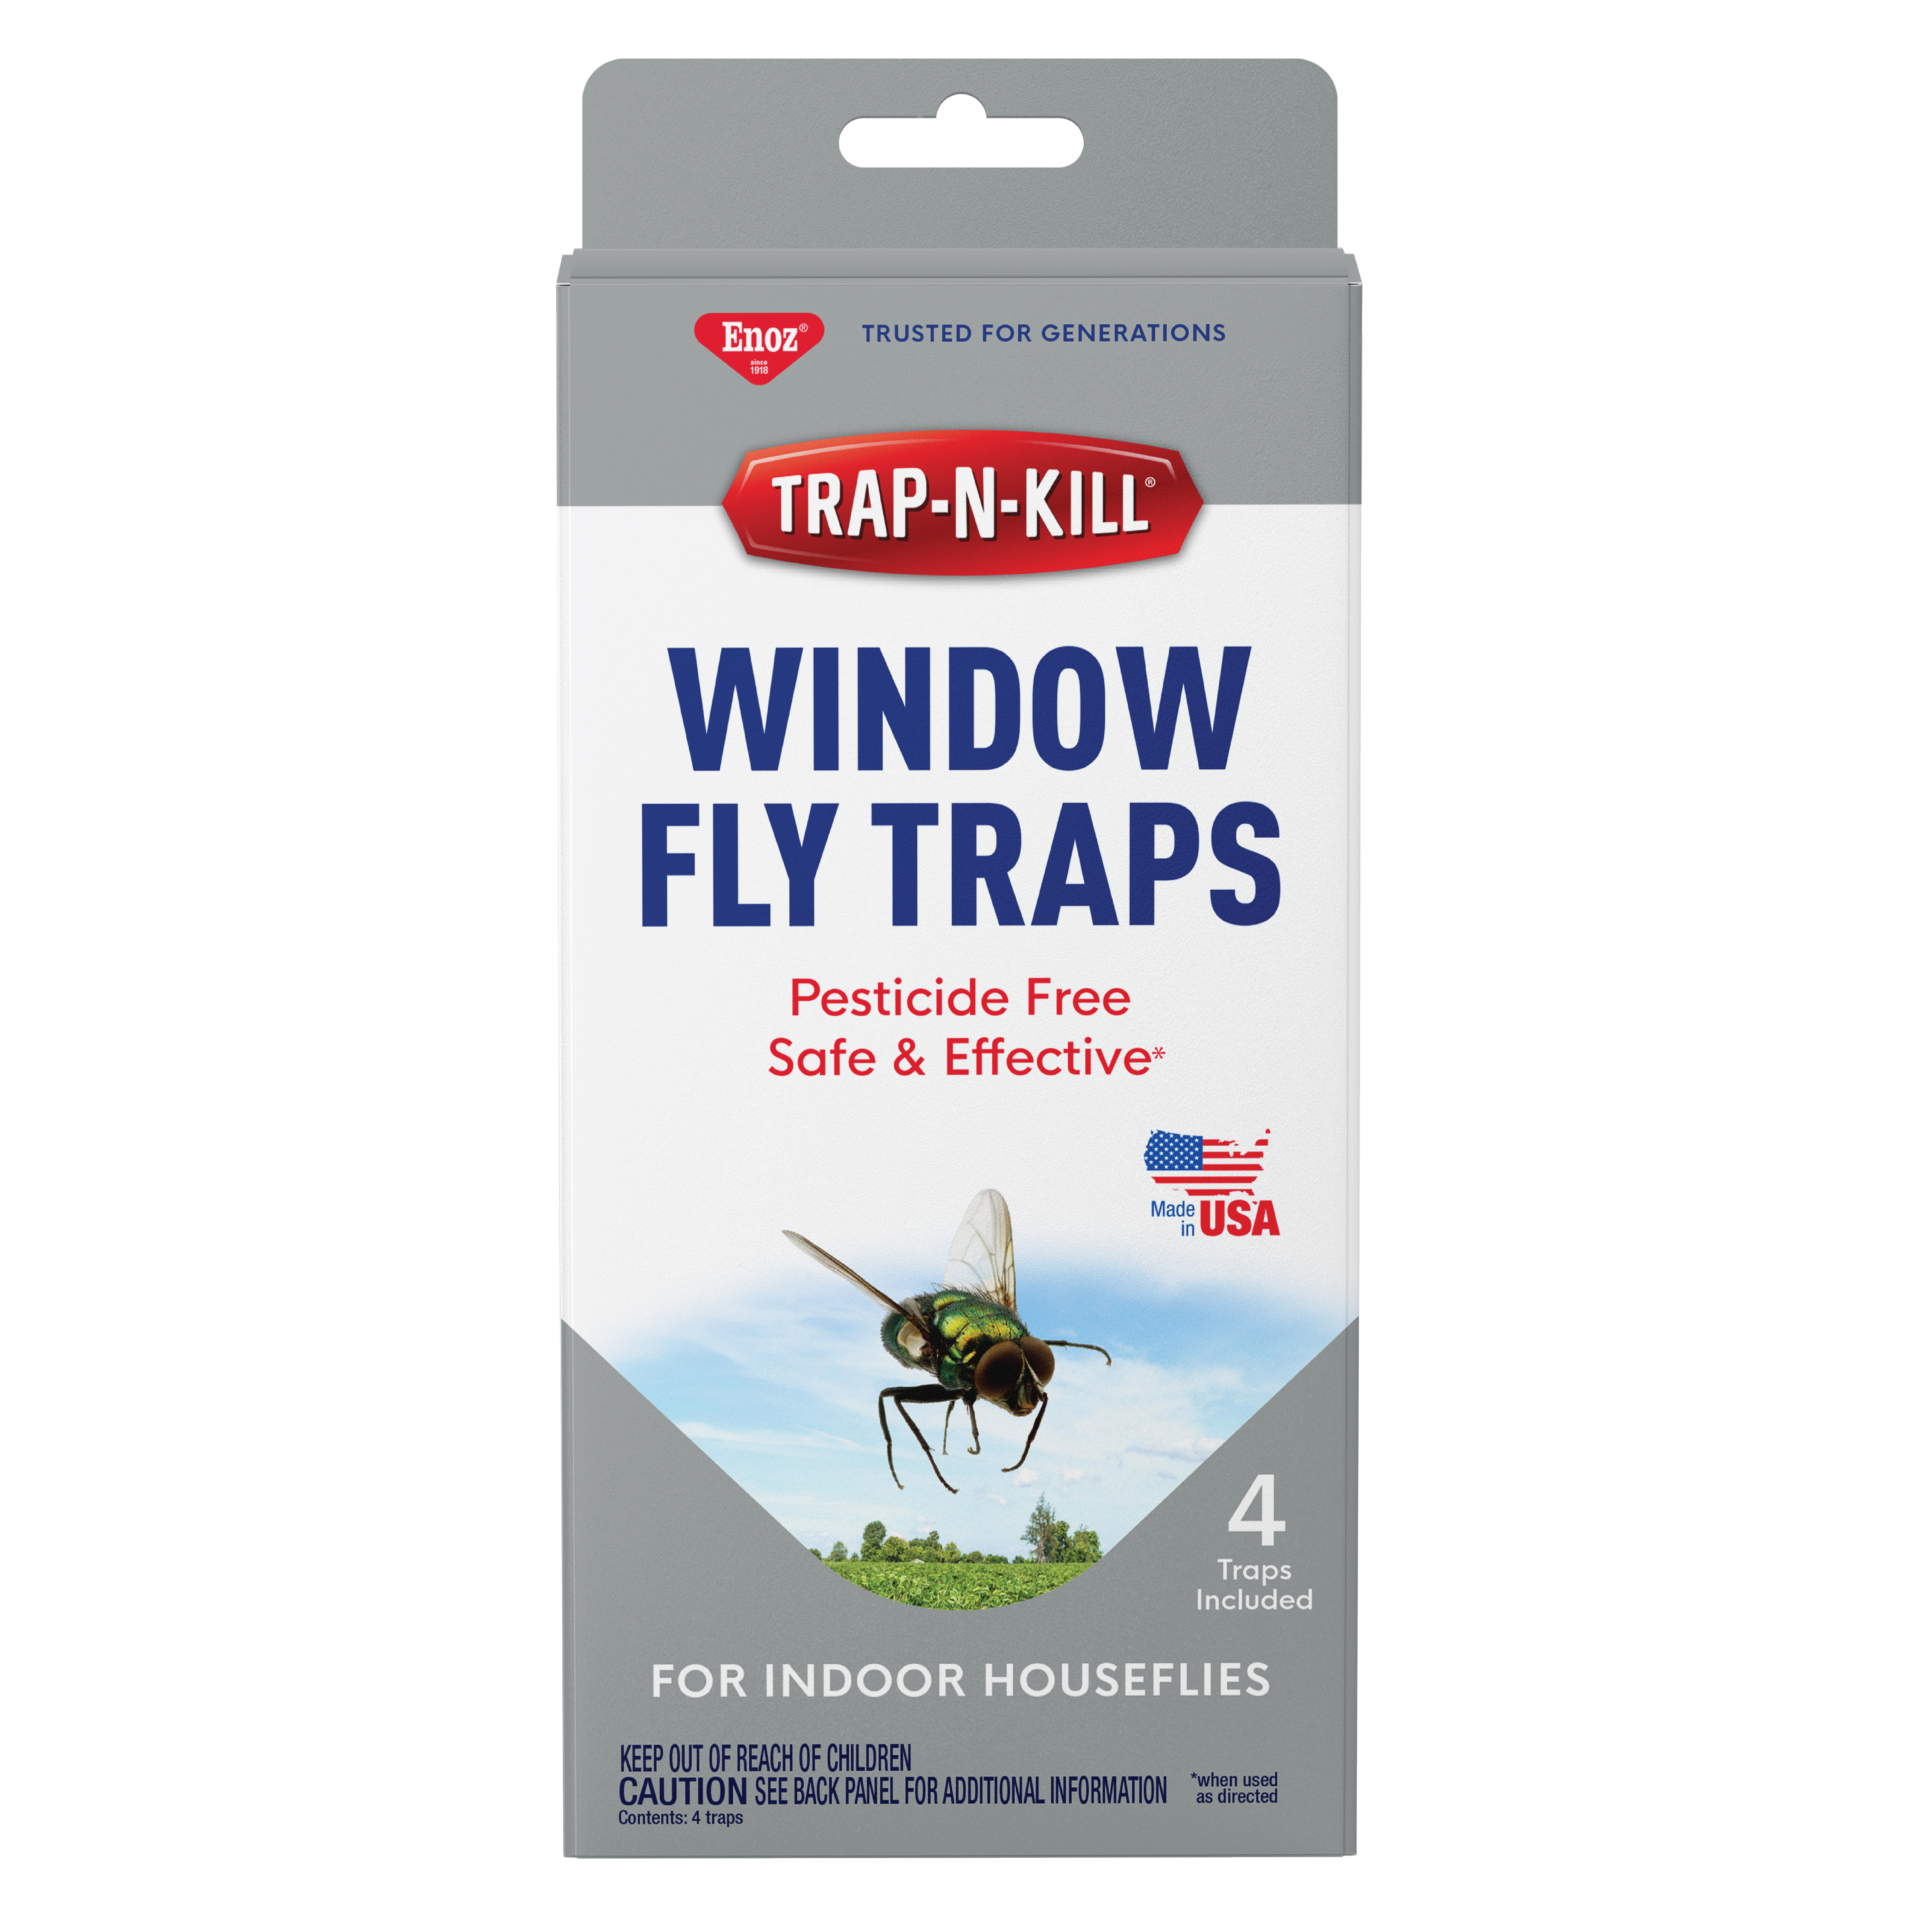  Enoz Trap-N-Kill Window Fly Traps for Indoor